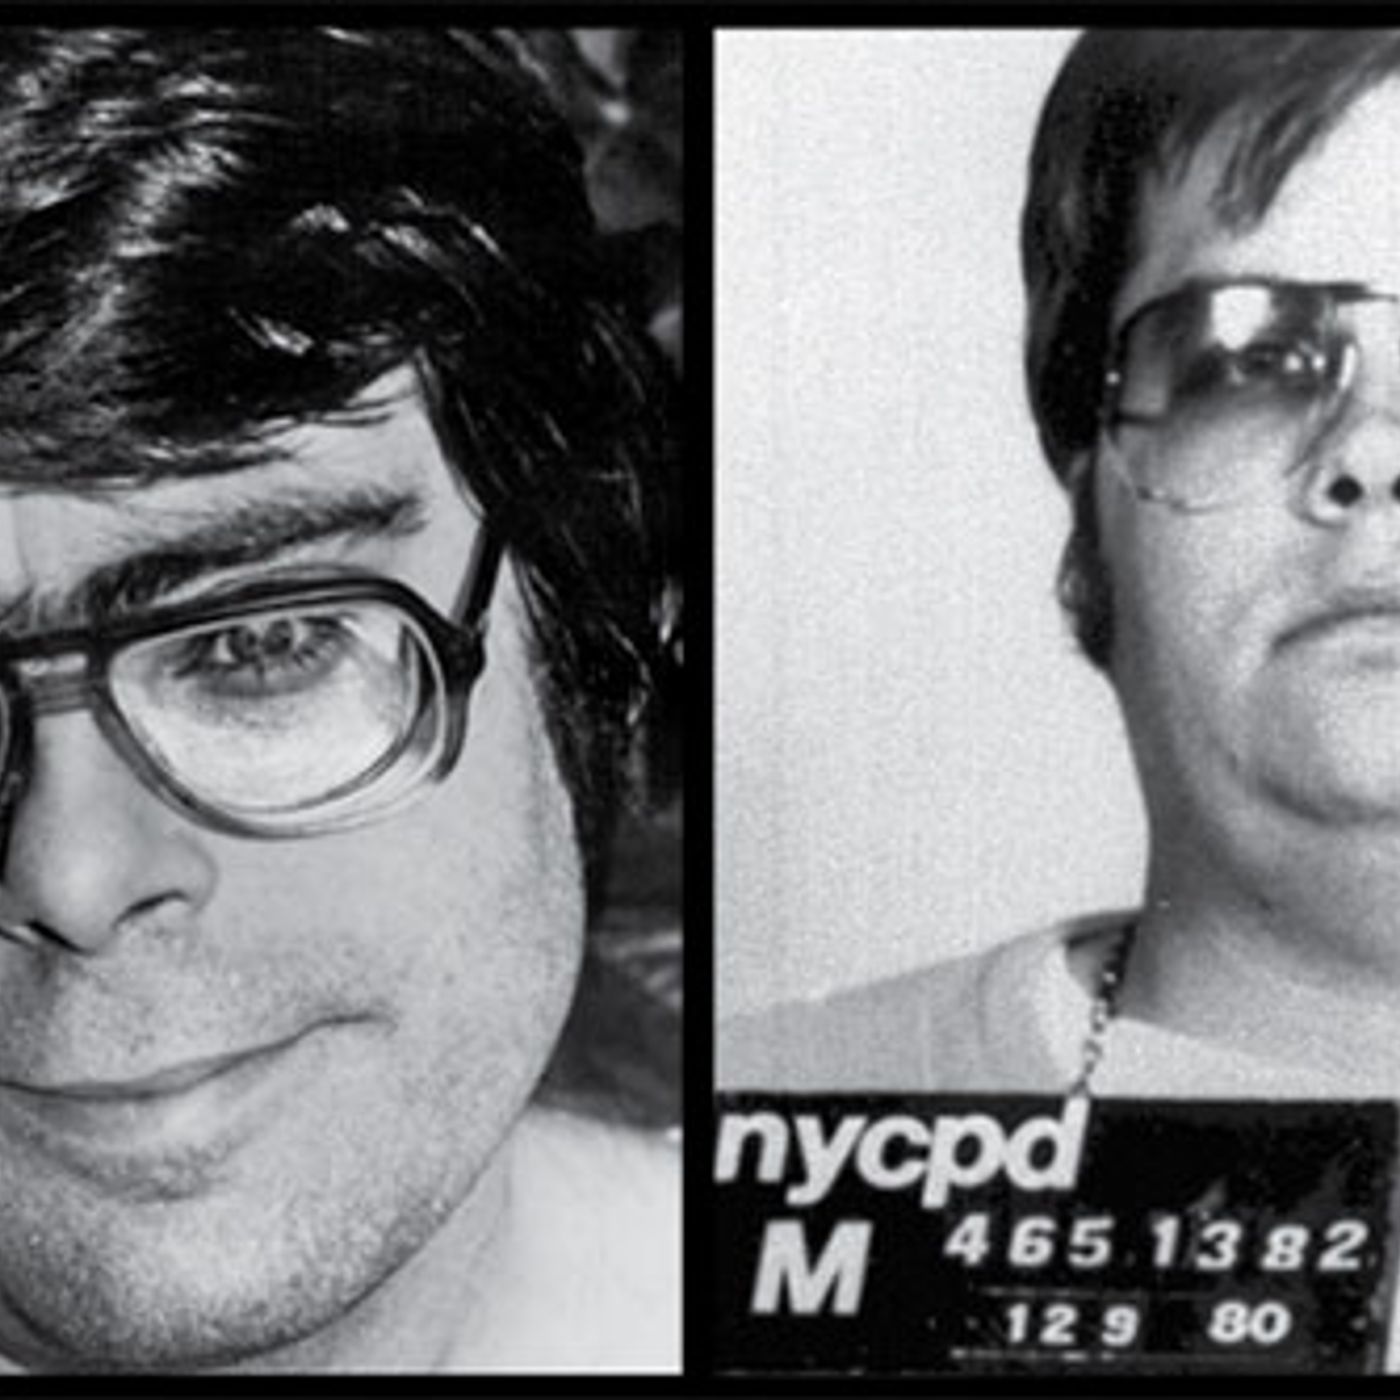 Did Stephen King Kill John Lennon? by Curly Conspiracies